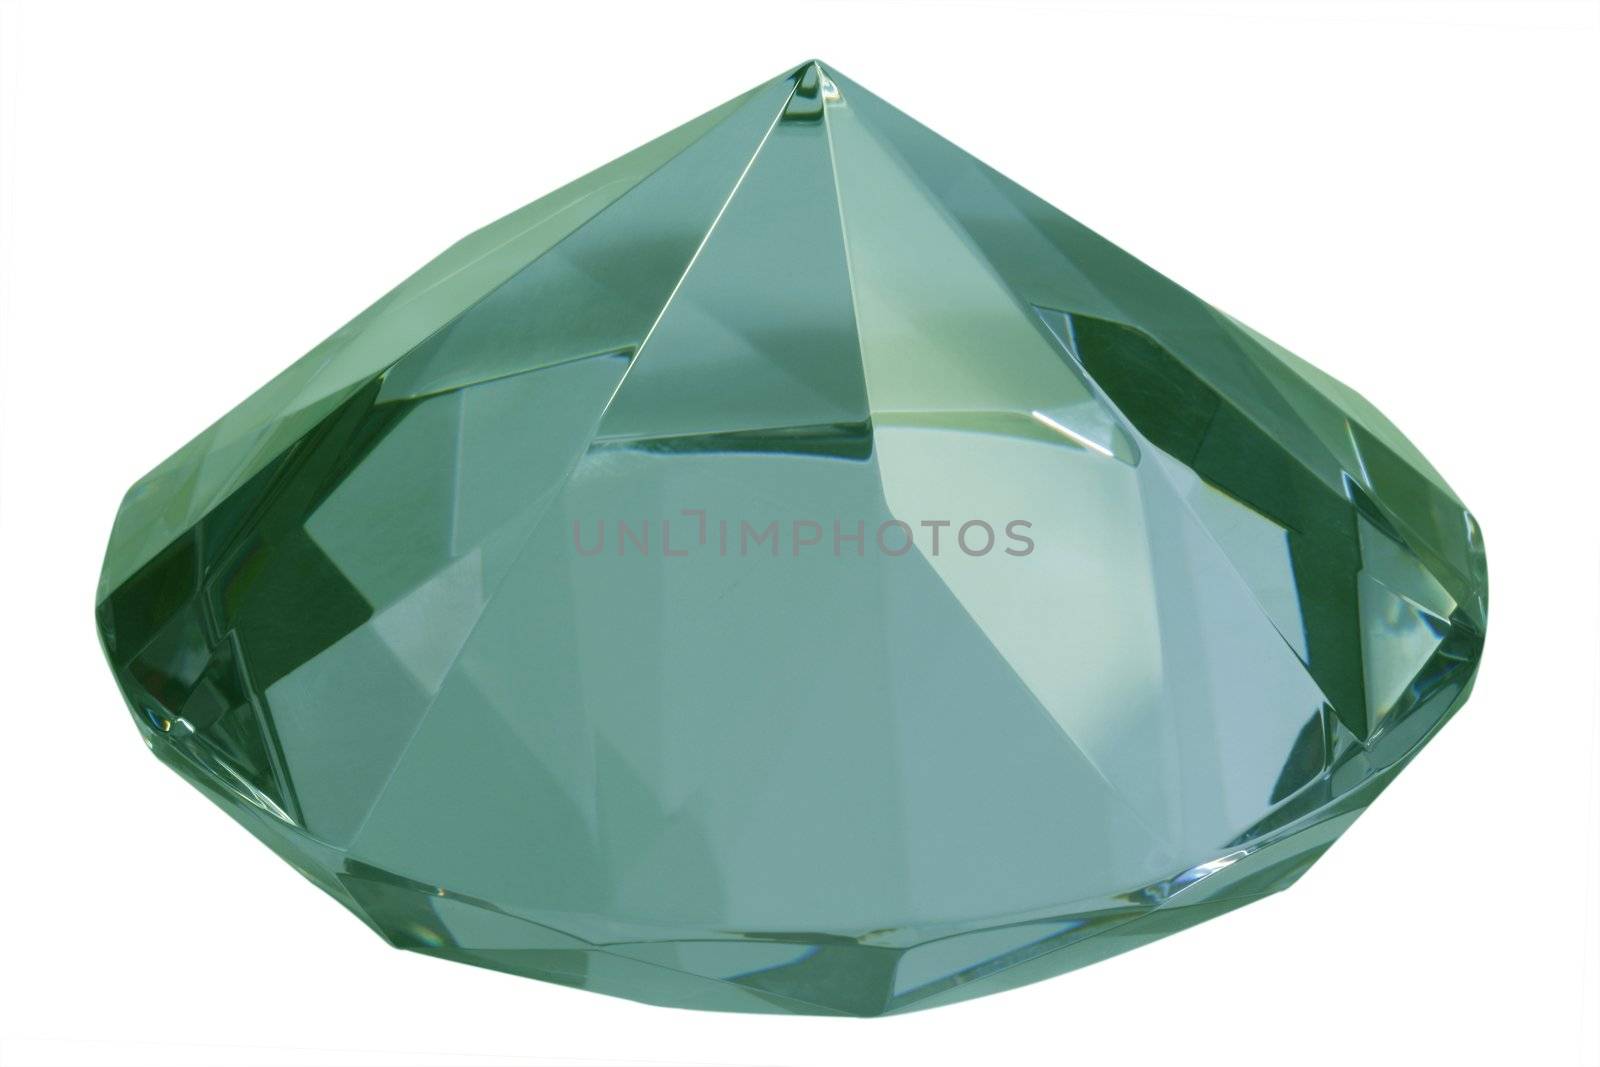 Green diamond of glass - isolated on white background